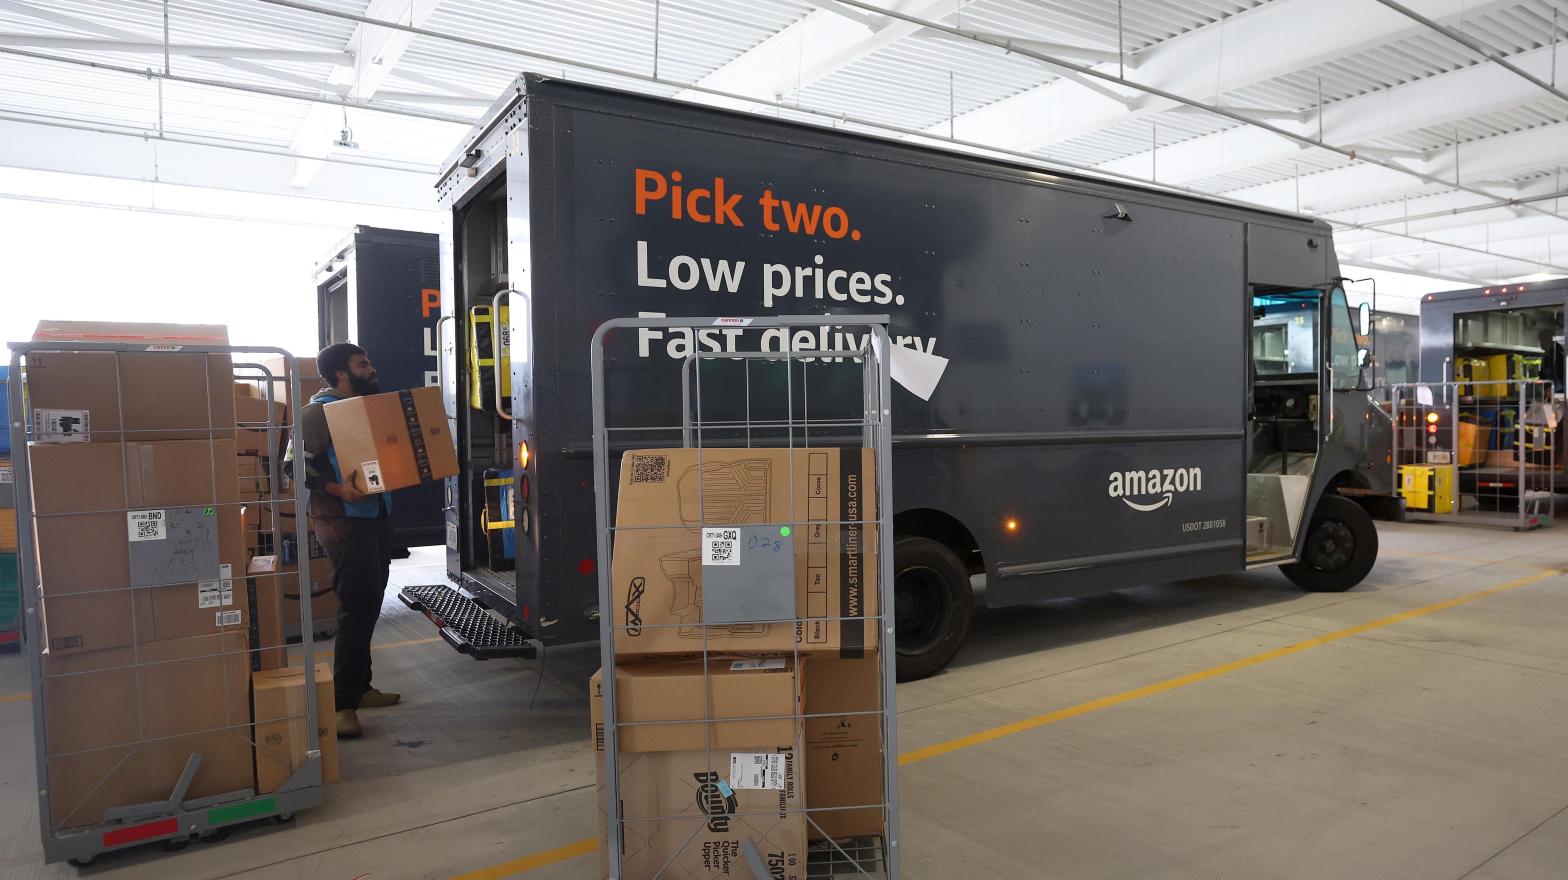 Amazon's 'Netradyne' AI reportedly tracks driver's moves and has allegedly cited them for violations if they do anything from sipping coffee to scratching their beard while on the move. (Photo: Justin Sullivan, Getty Images)